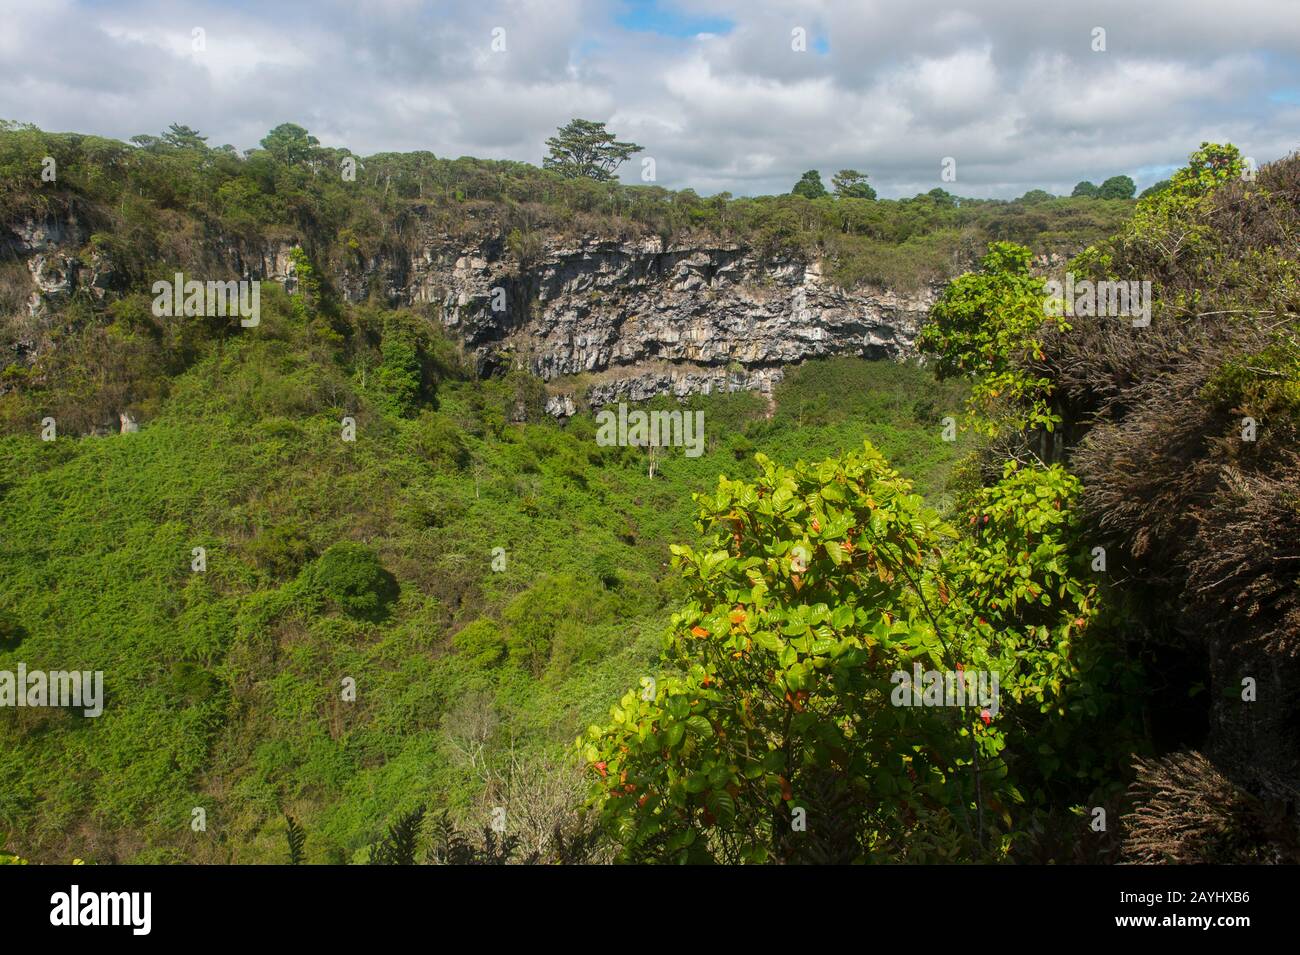 A sinkhole (twin craters) in the Scalesia forest (member of the Daisy family or Asteraceae) in the highlands of Santa Cruz Island in the Galapagos Isl Stock Photo